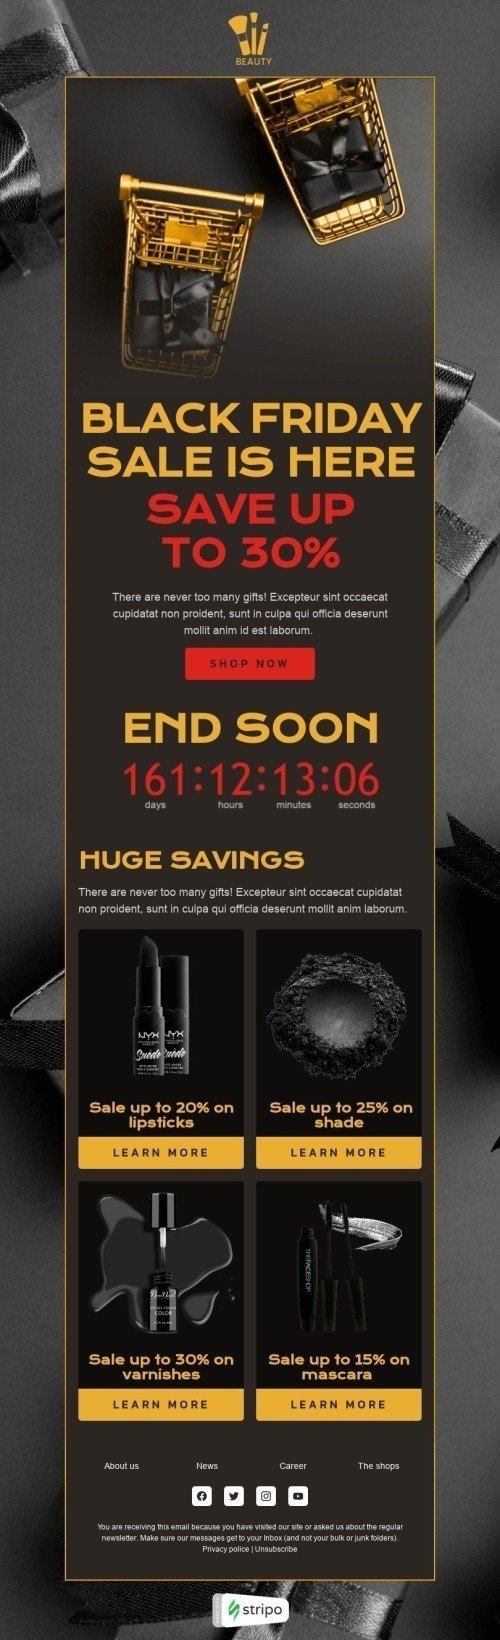 Black Friday Email Template «Huge savings» for Beauty & Personal Care industry mobile view